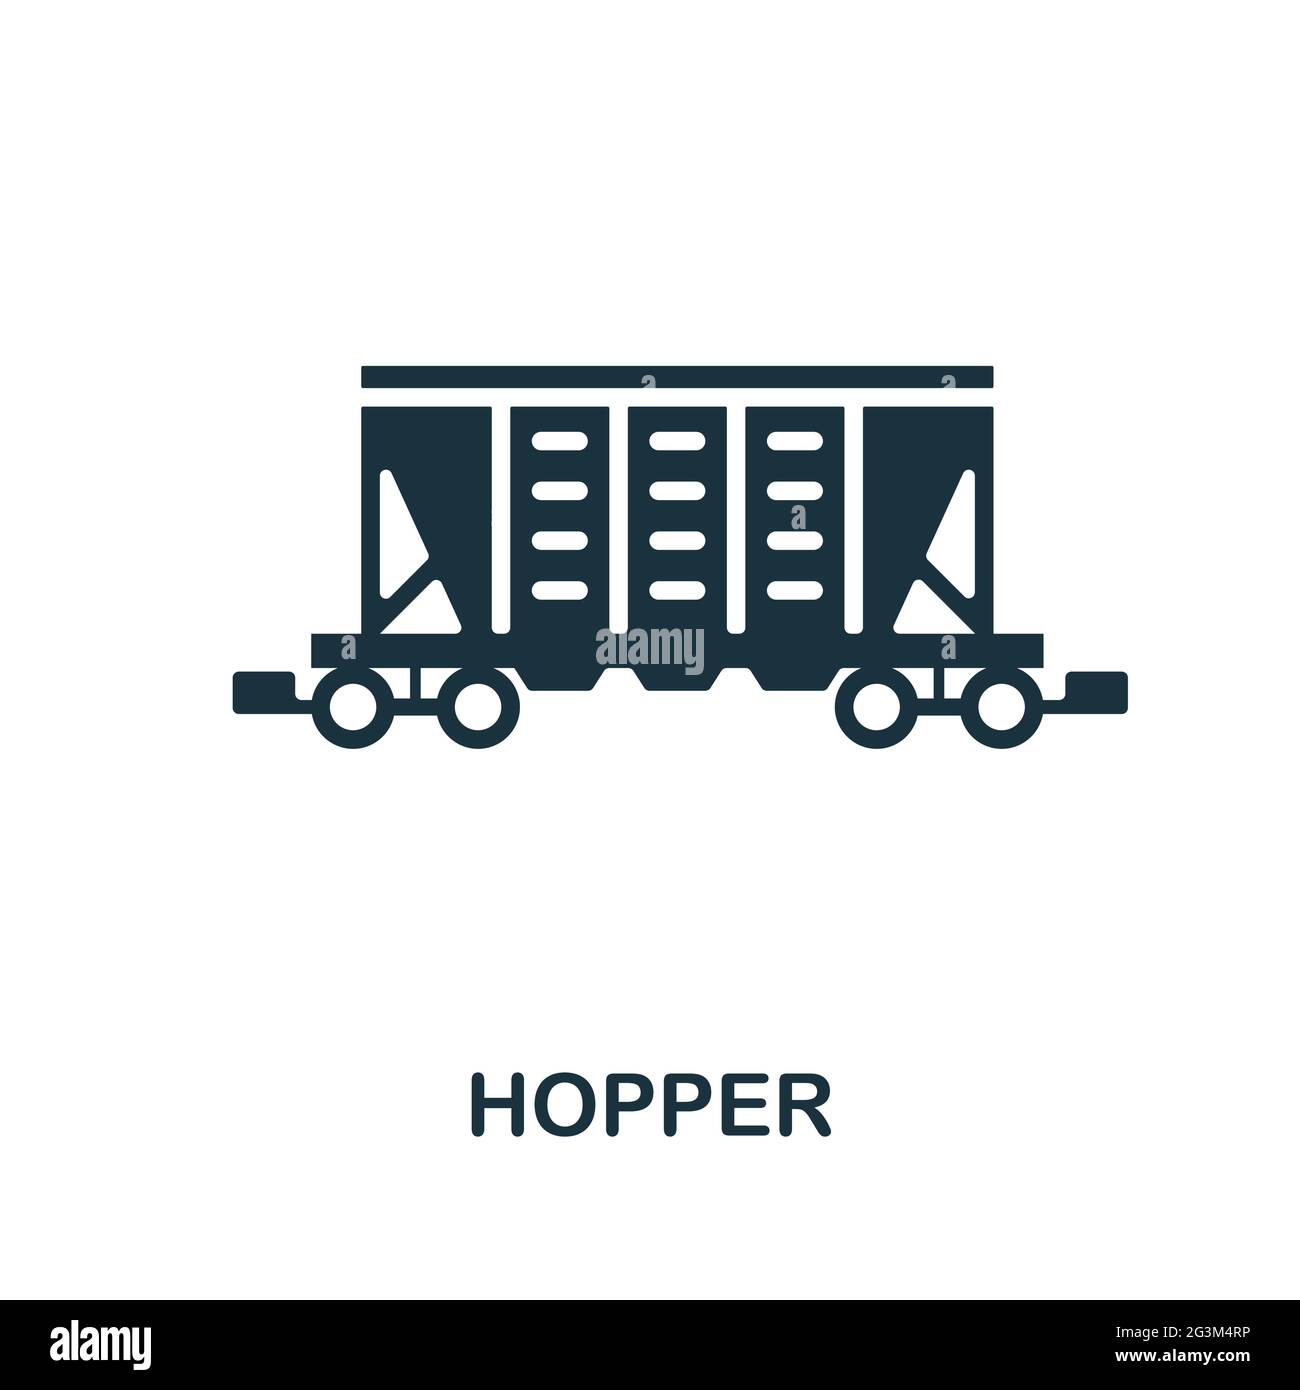 Hopper flat icon. Colored filled simple Hopper icon for templates, web design and infographics Stock Vector